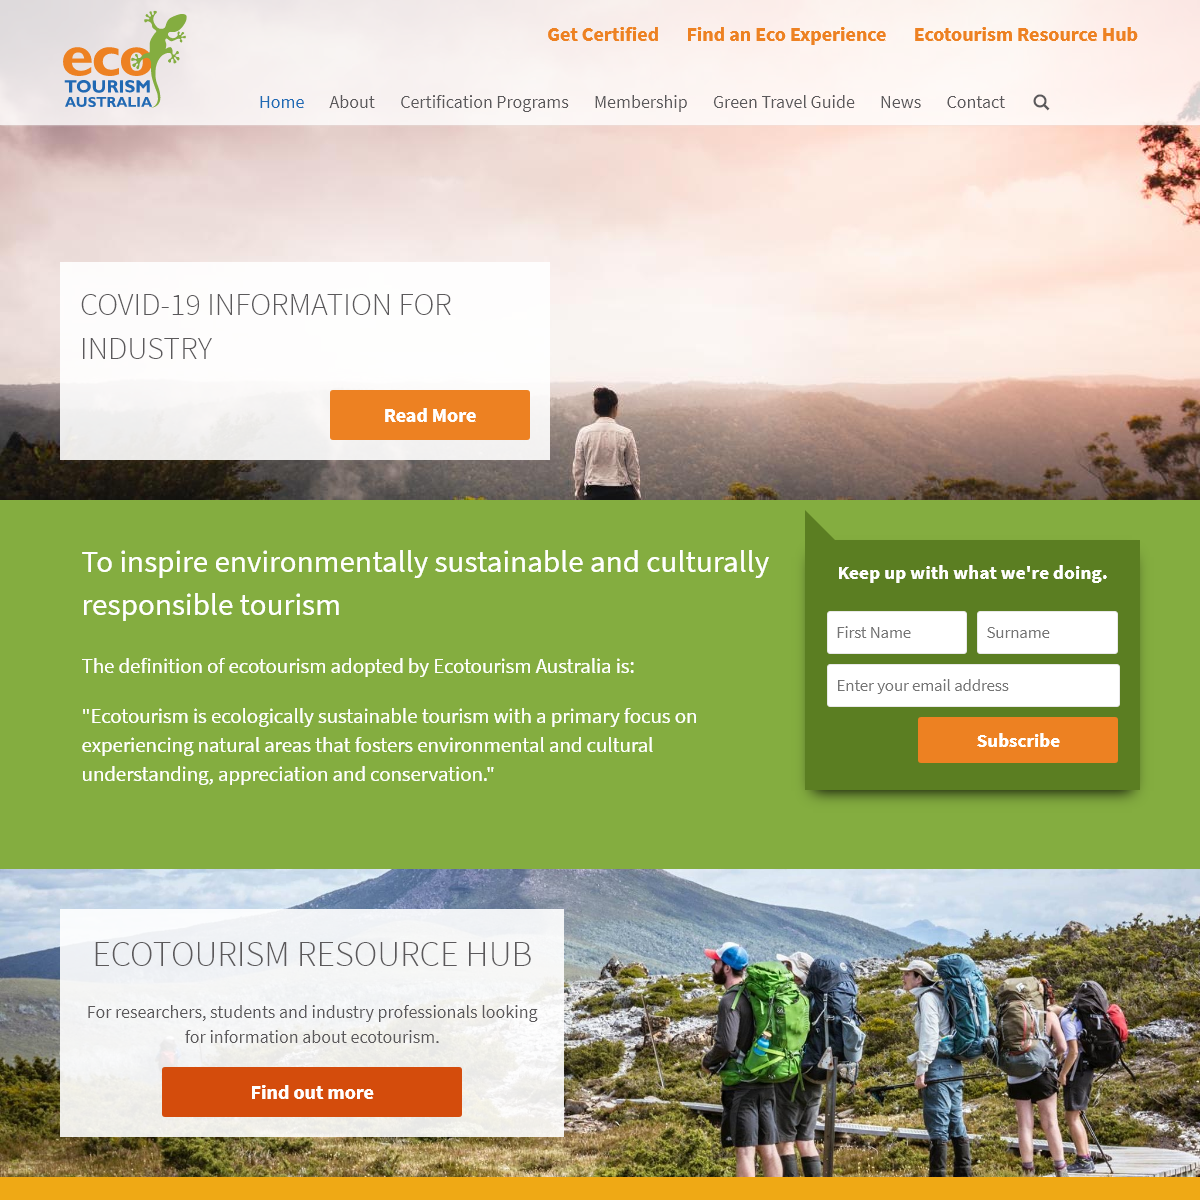 A complete backup of ecotourism.org.au